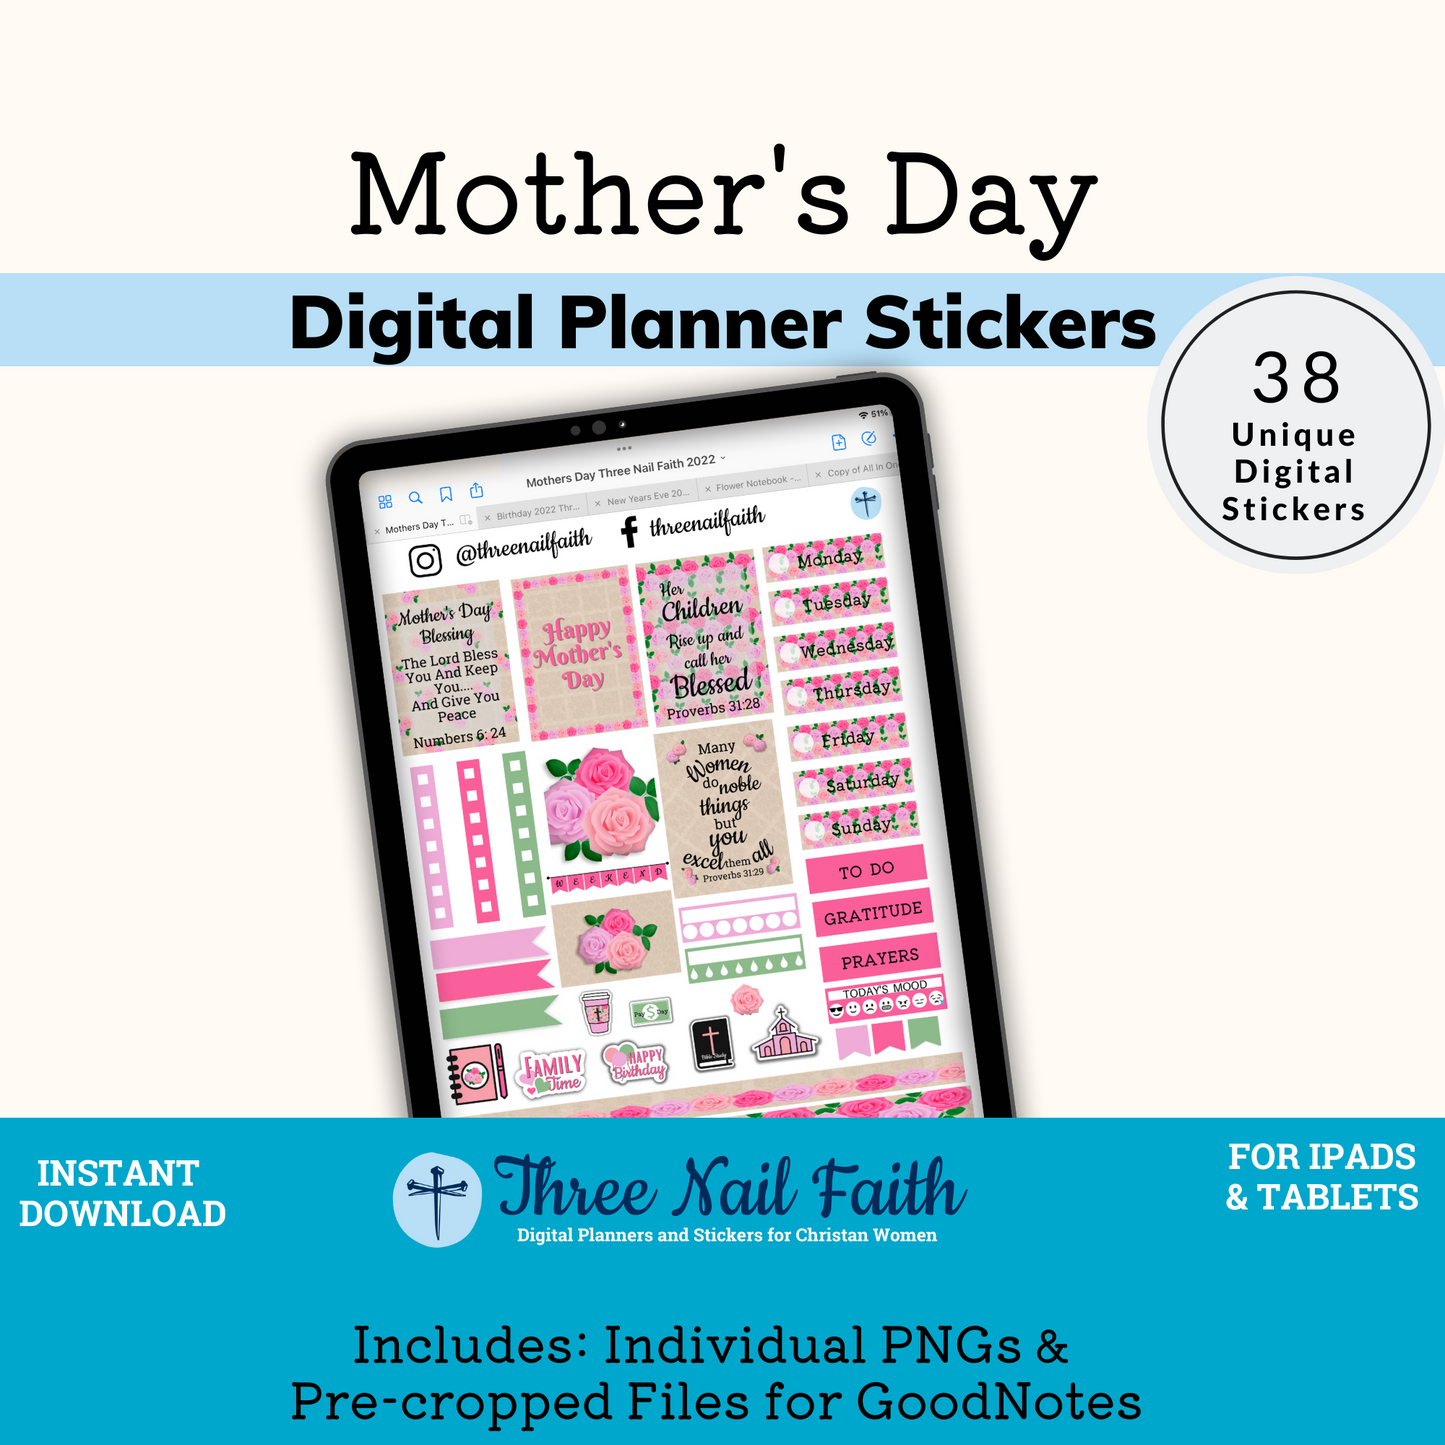 Mothers day digital sticker kit with 38 Digital stickers